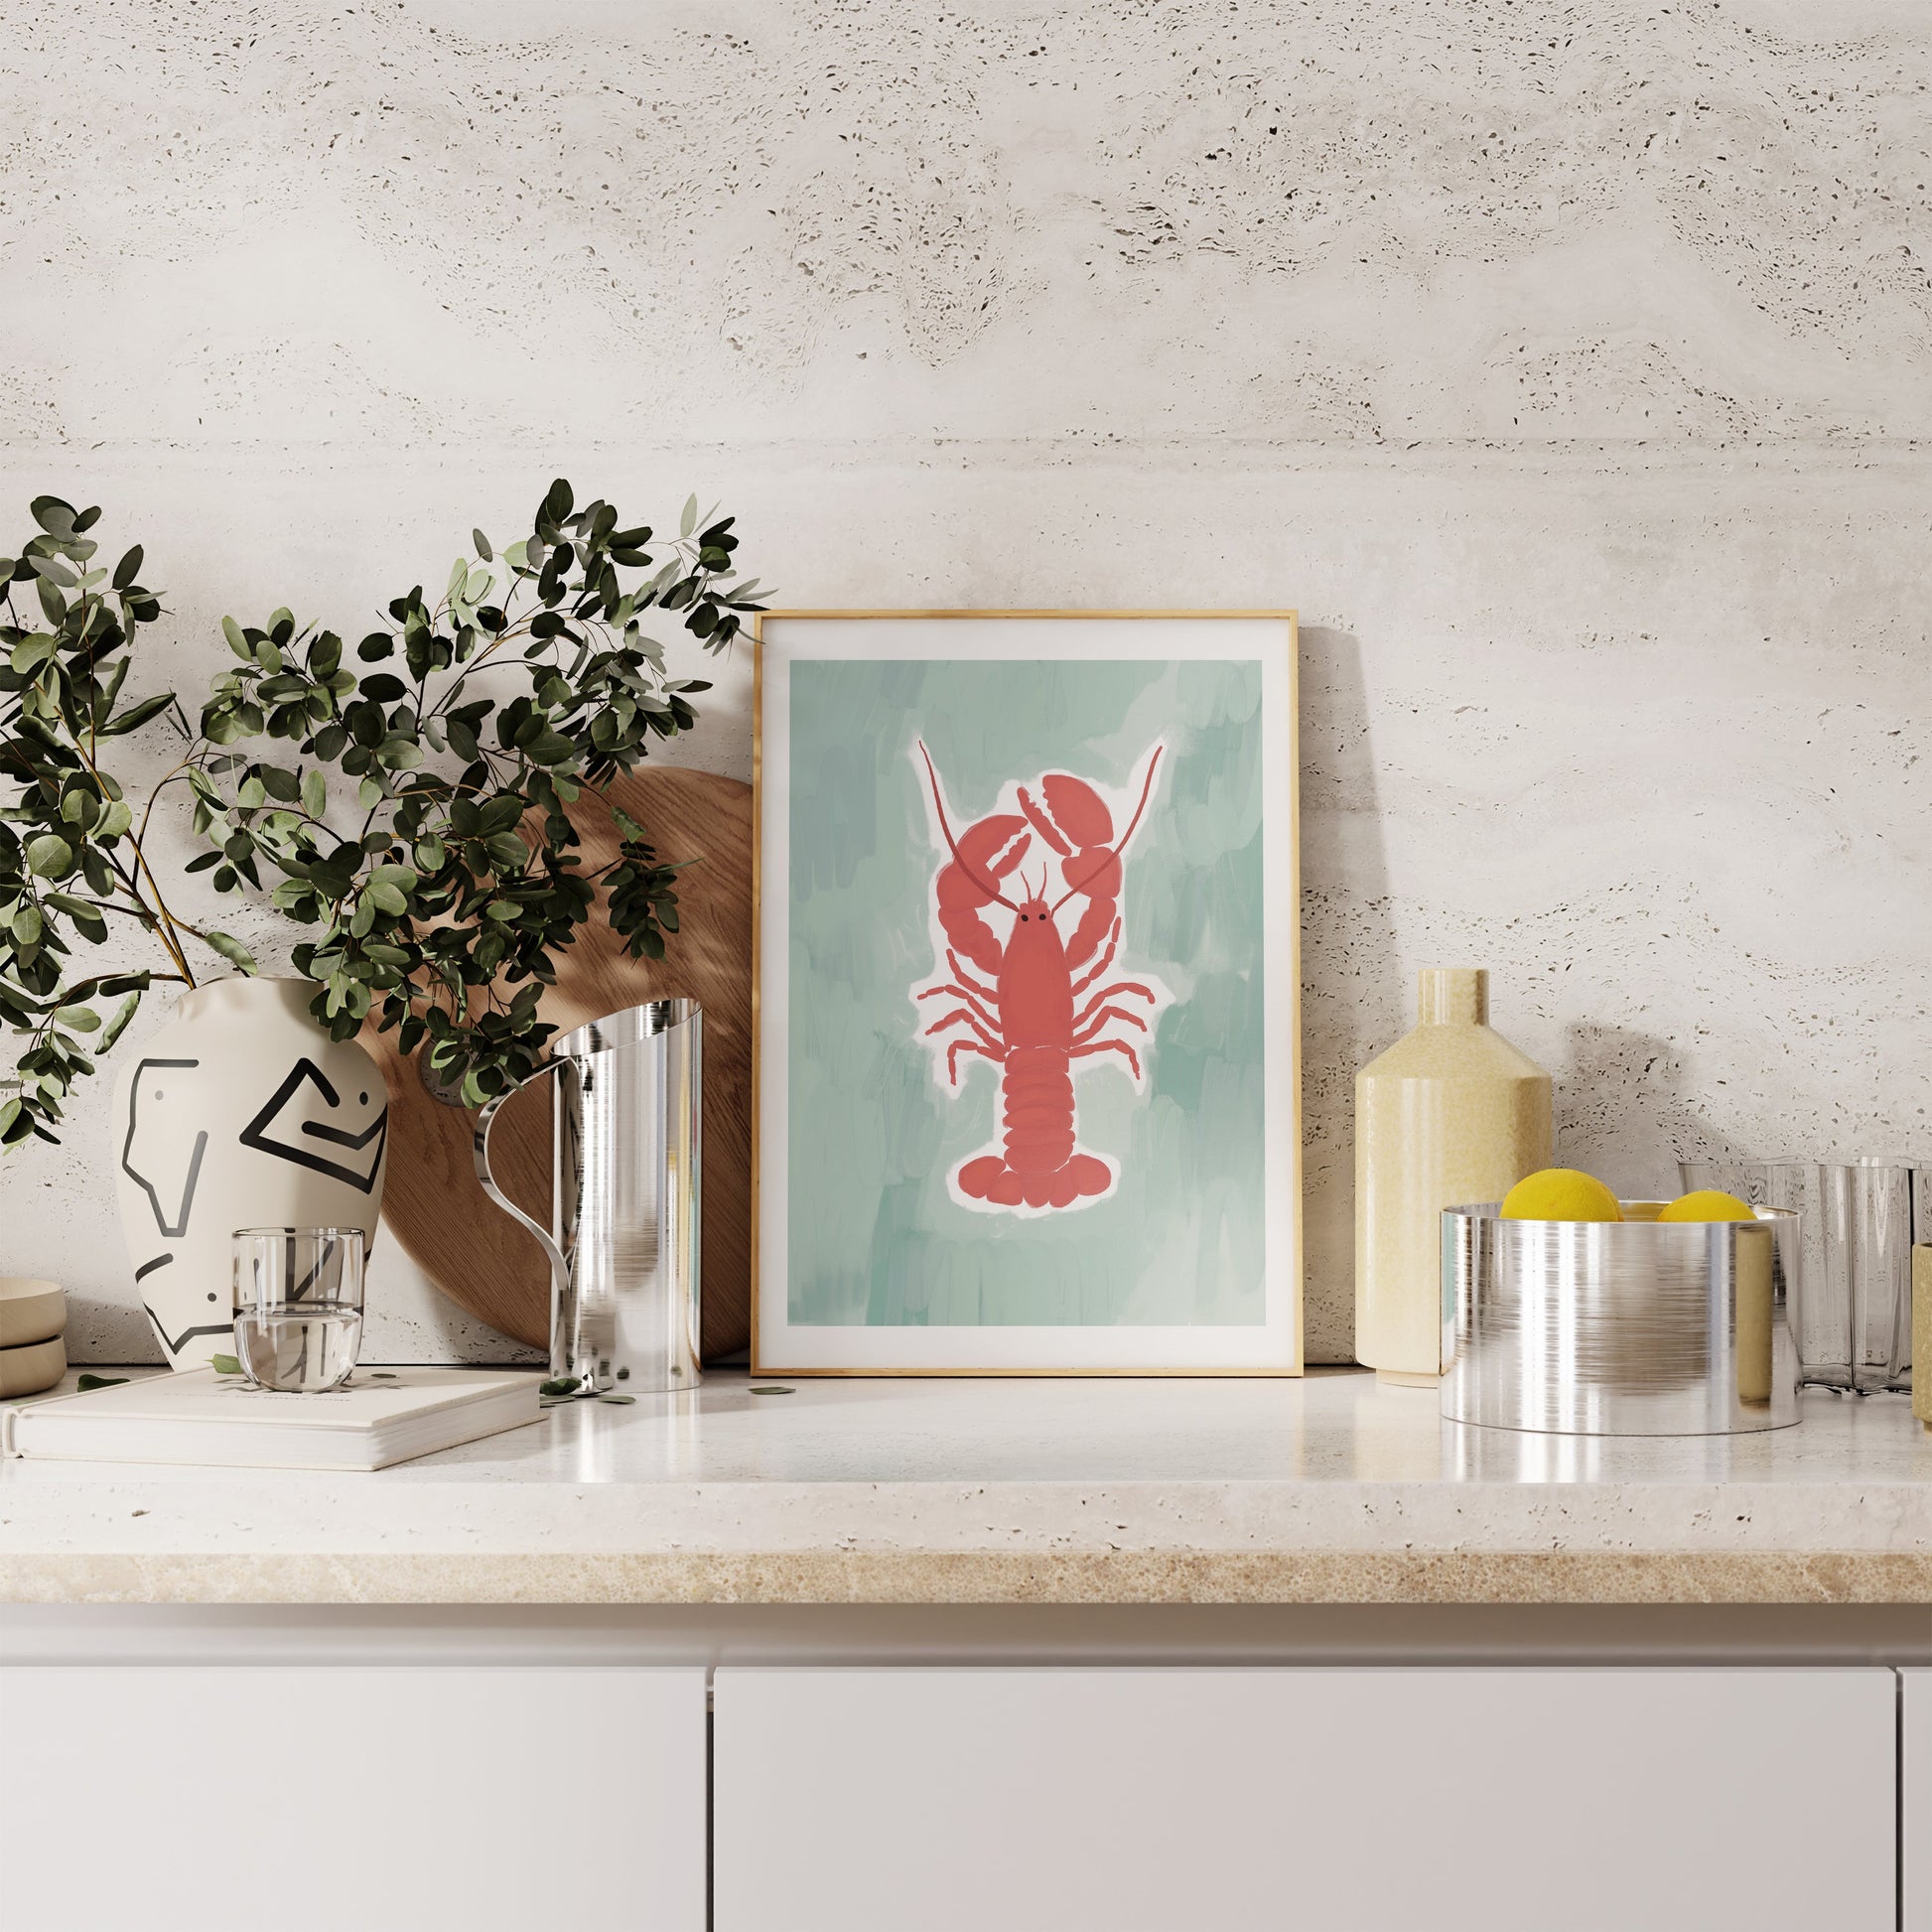 a picture of a lobster on a wall above a counter